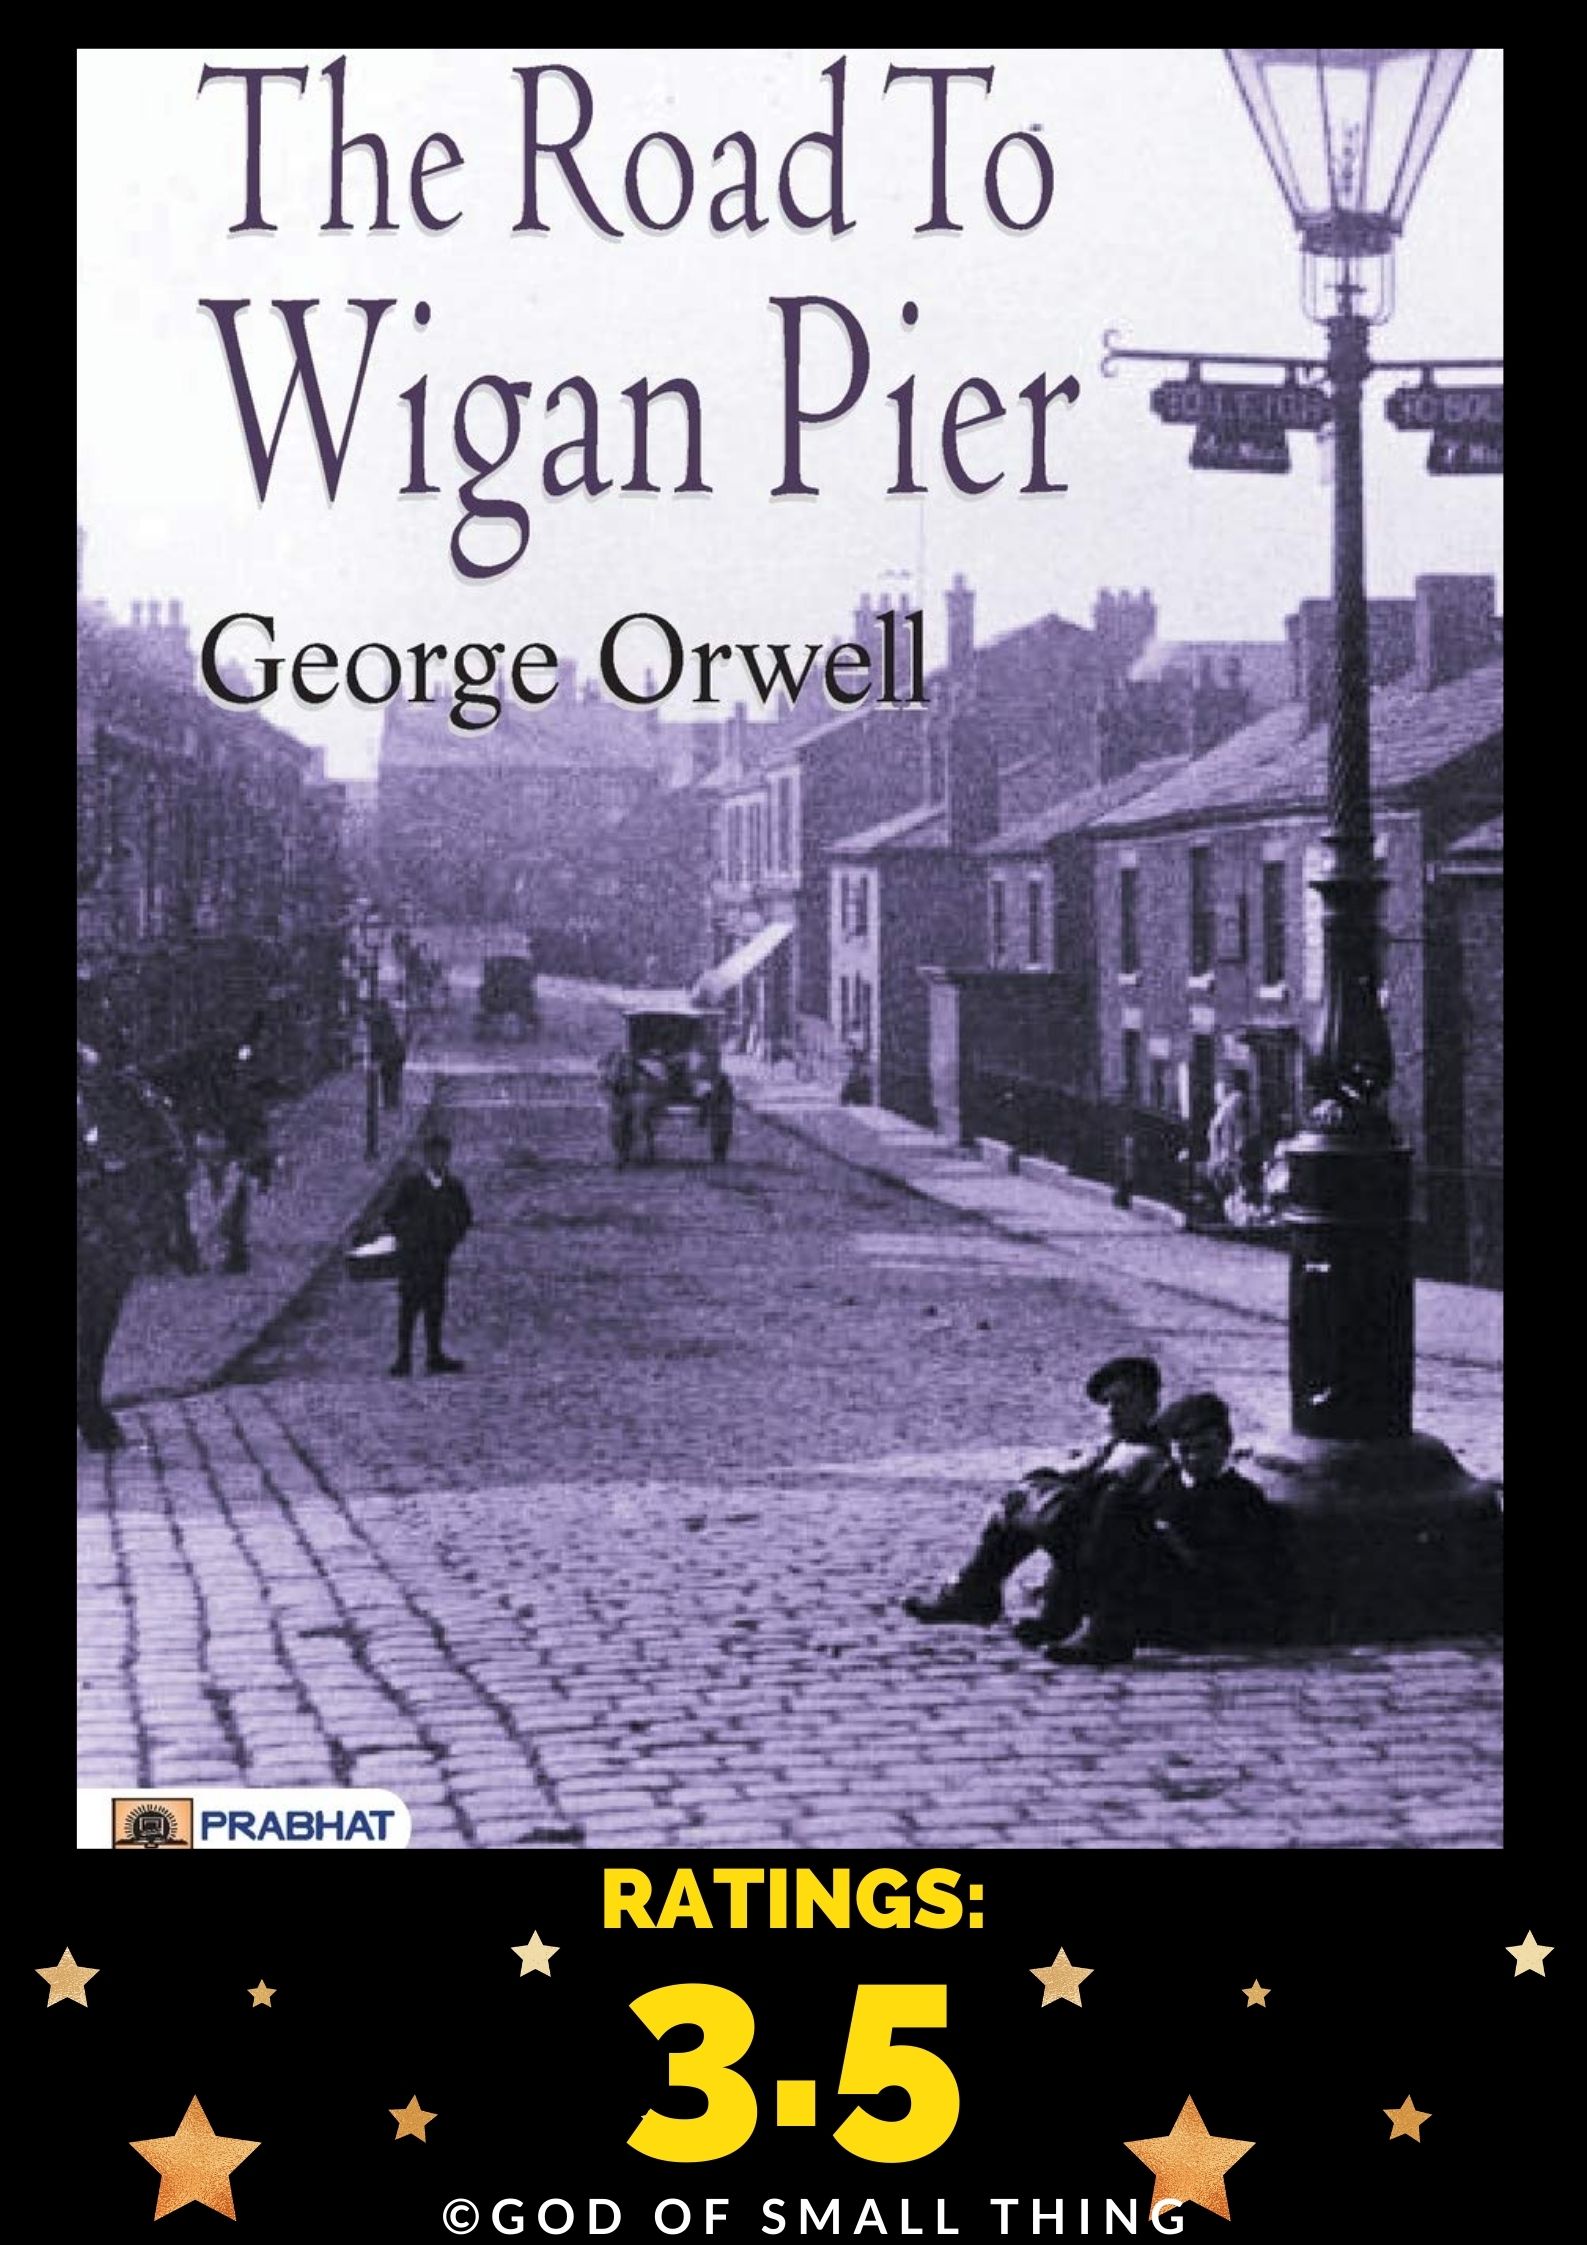 The Road to Wigan Pier book by George Orwell